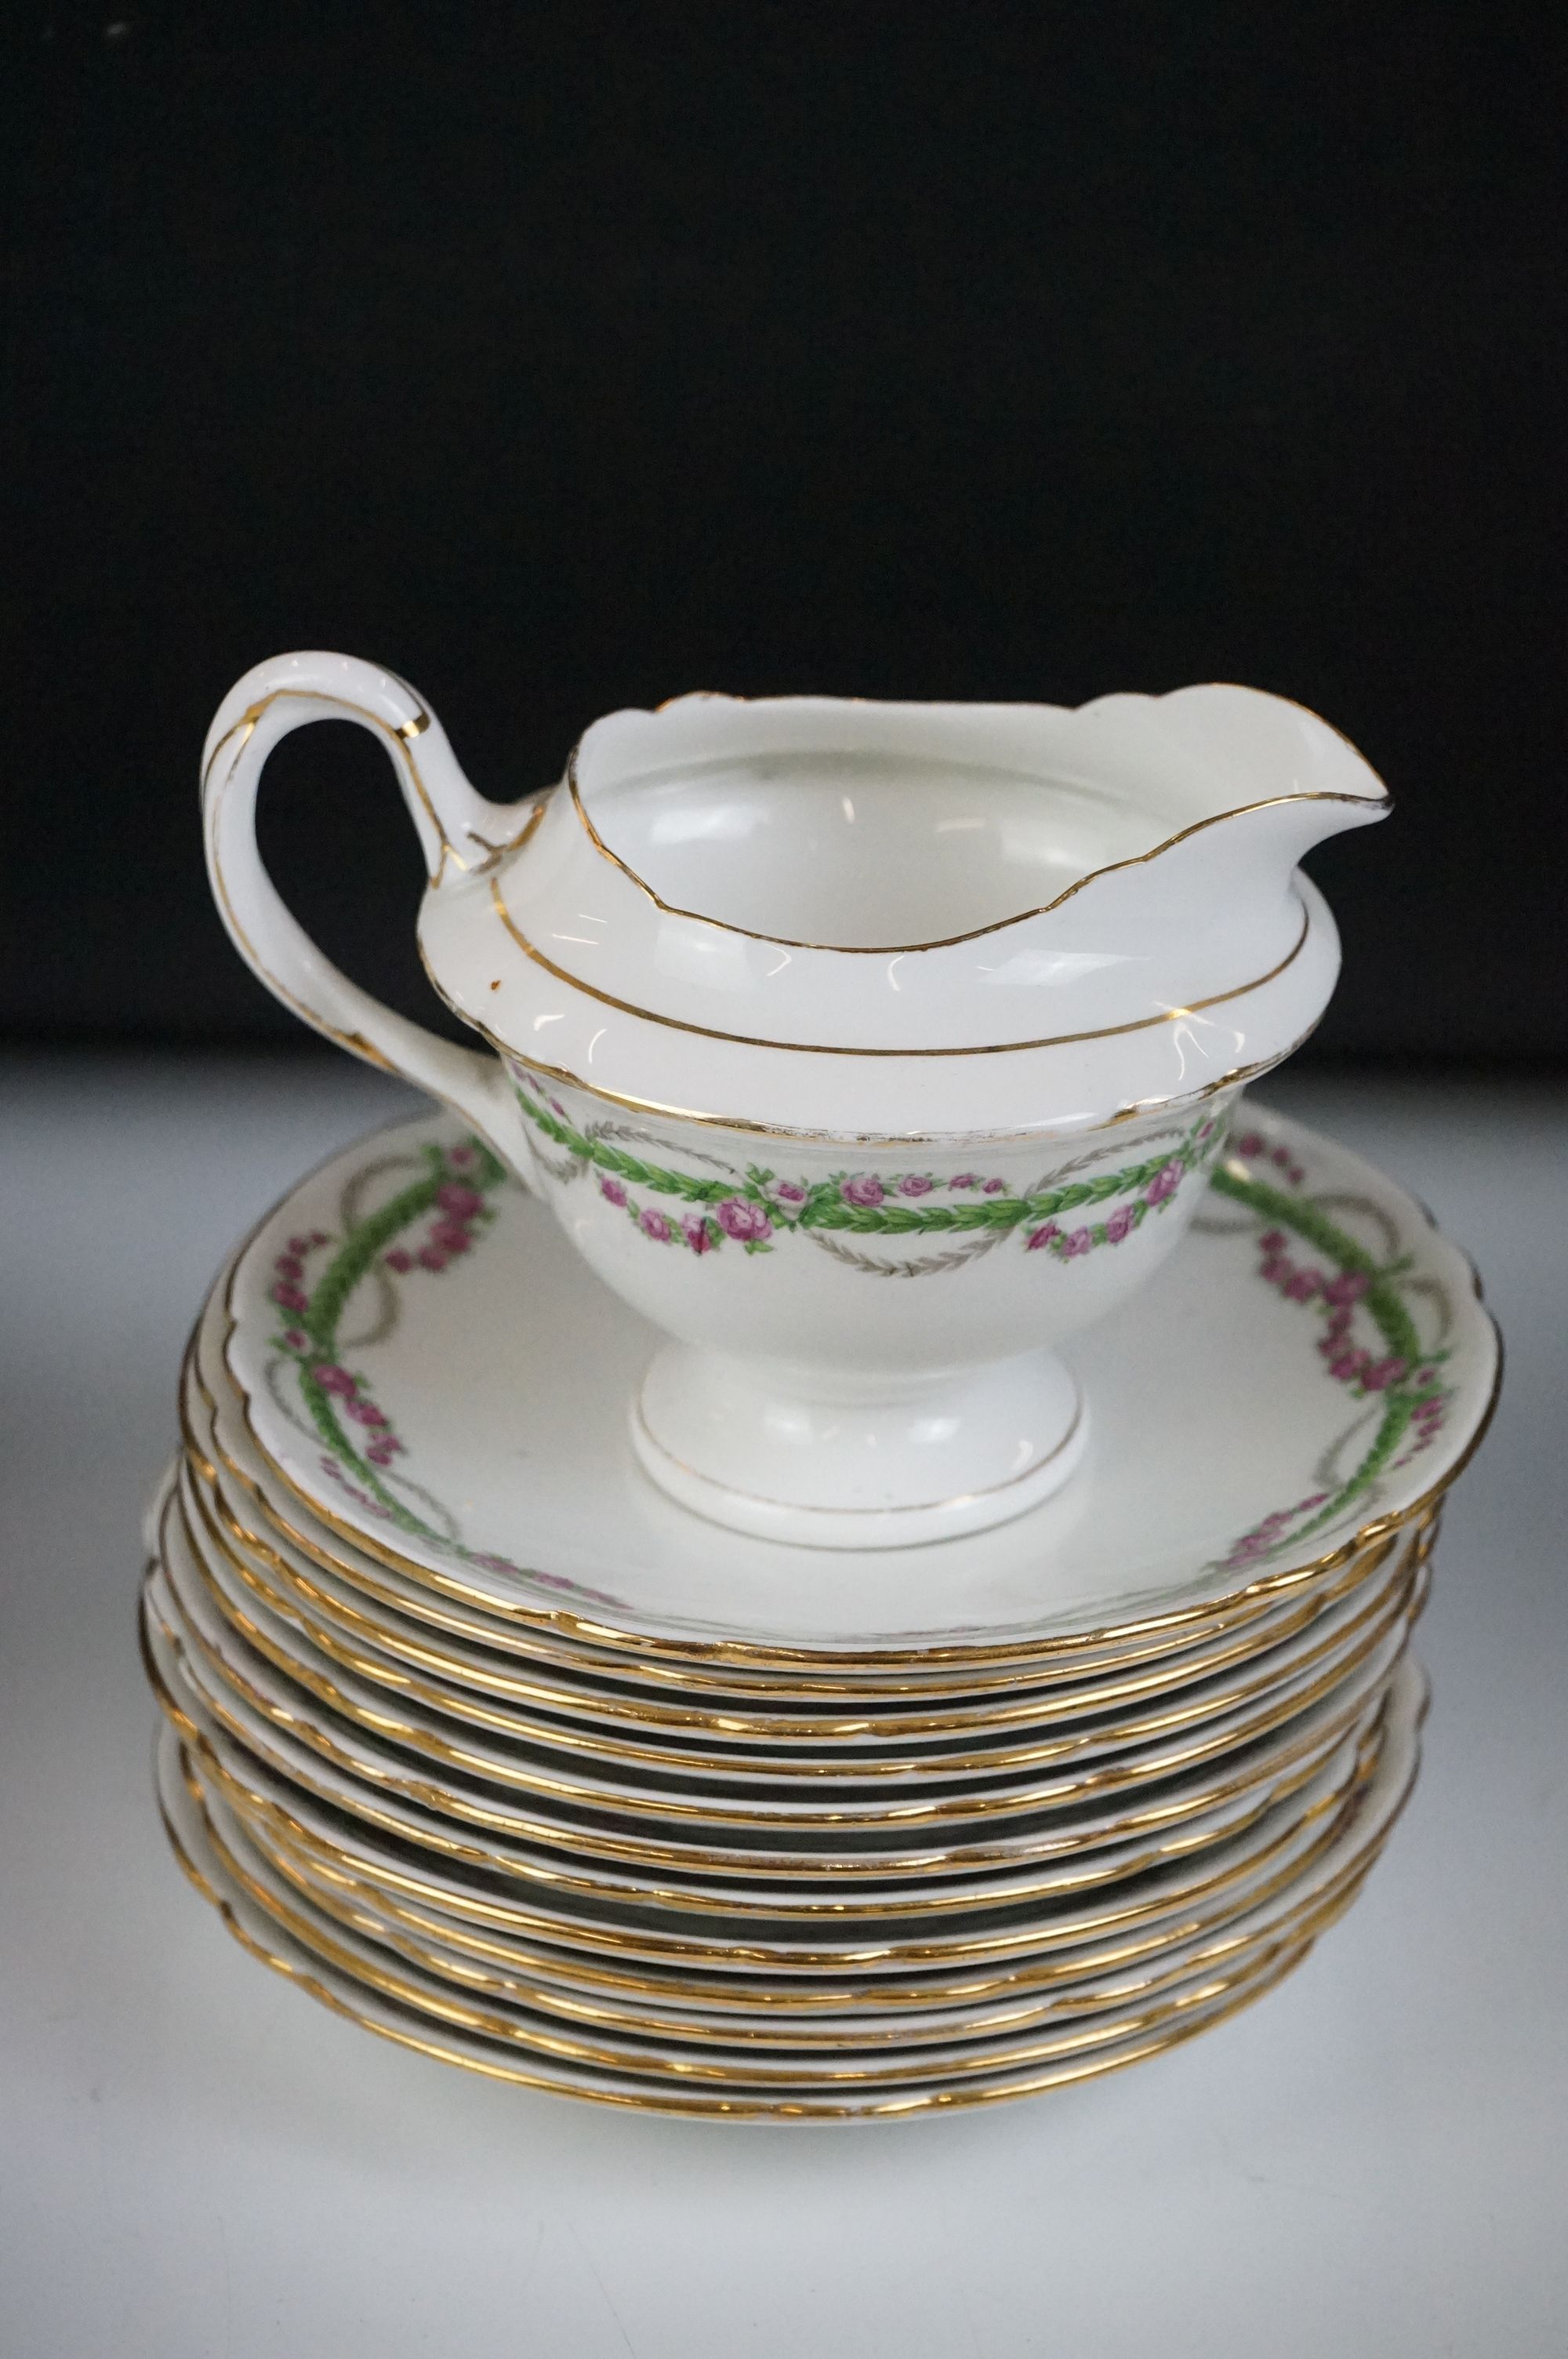 Early 20th Century Shelley ' Late Foley ' tea set, pattern no. 10550, with pink and green floral - Image 4 of 13